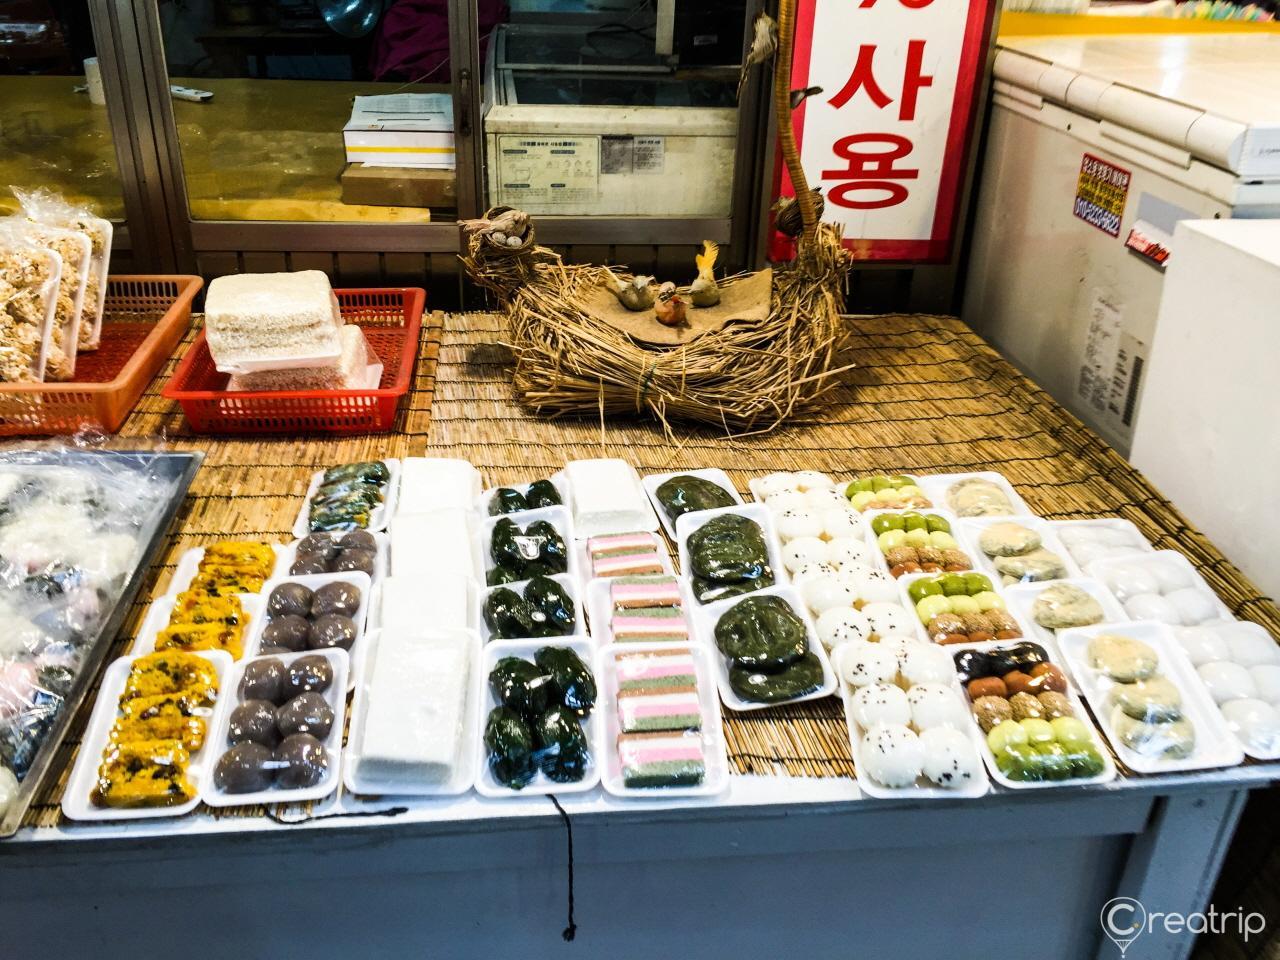 A colorful display of sweet and savory finger foods, ingredients, and whole foods at the bustling Tongin market in Korea.